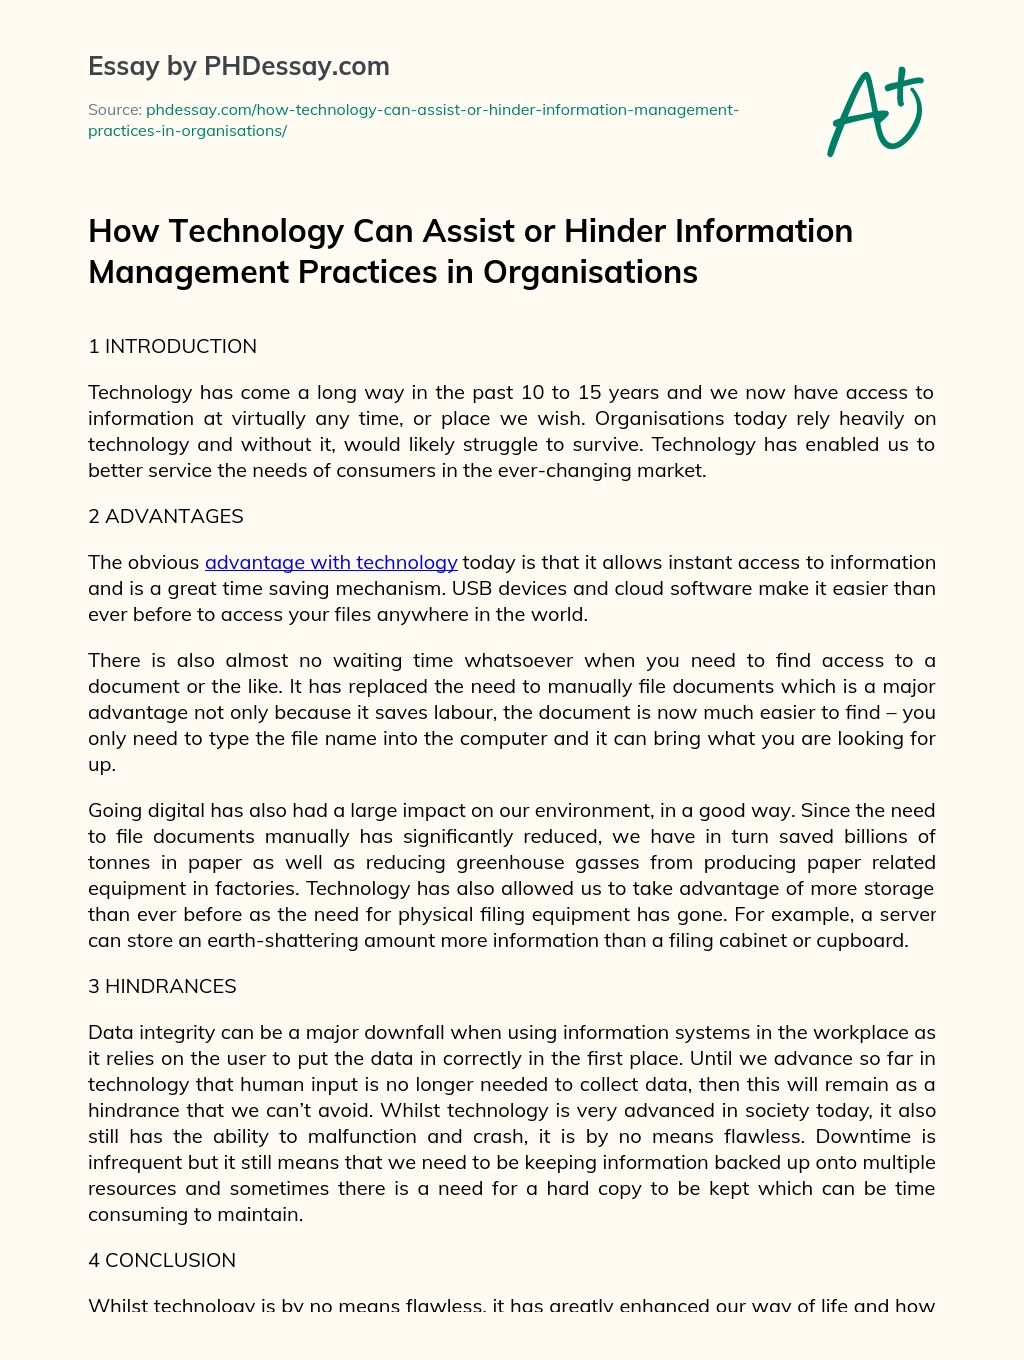 How Technology Can Assist or Hinder Information Management Practices in Organisations essay